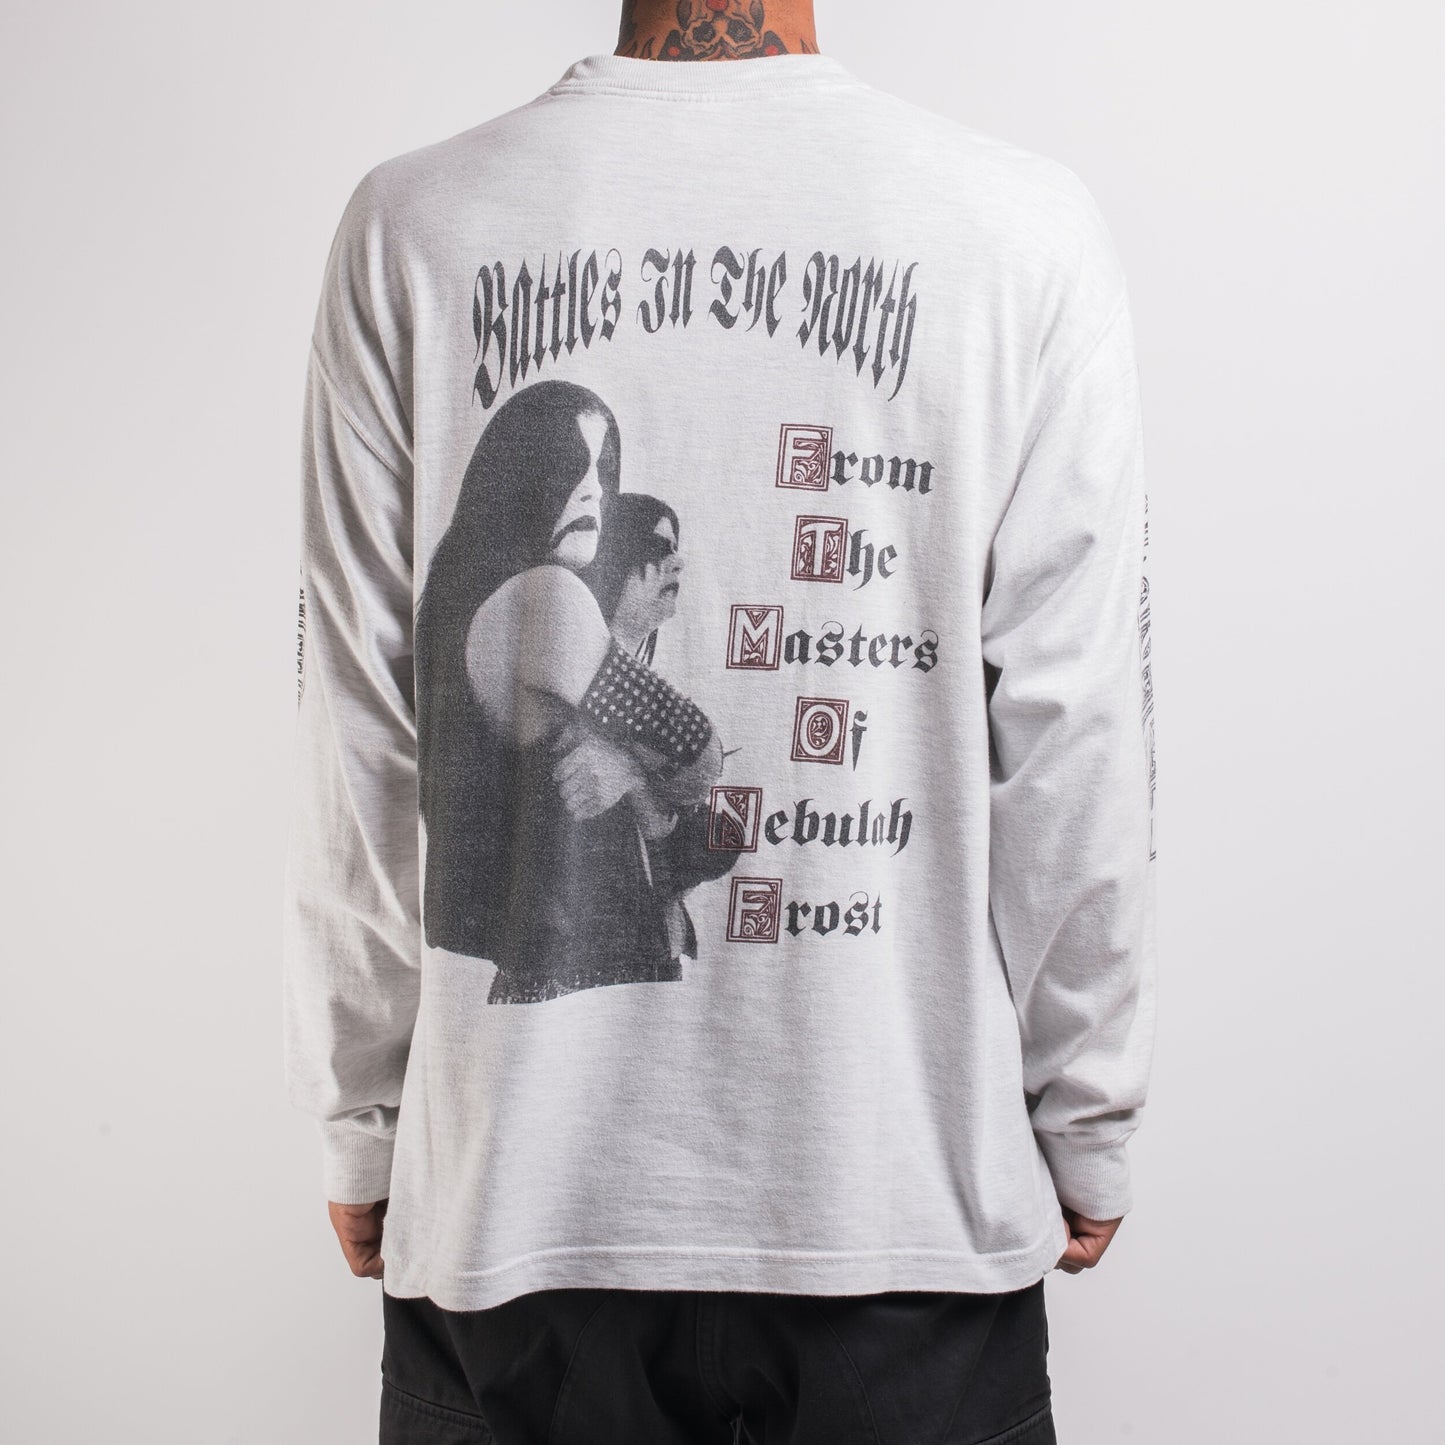 Vintage Immortal at the Heart of Winter Long Sleeve 1999 -  UK